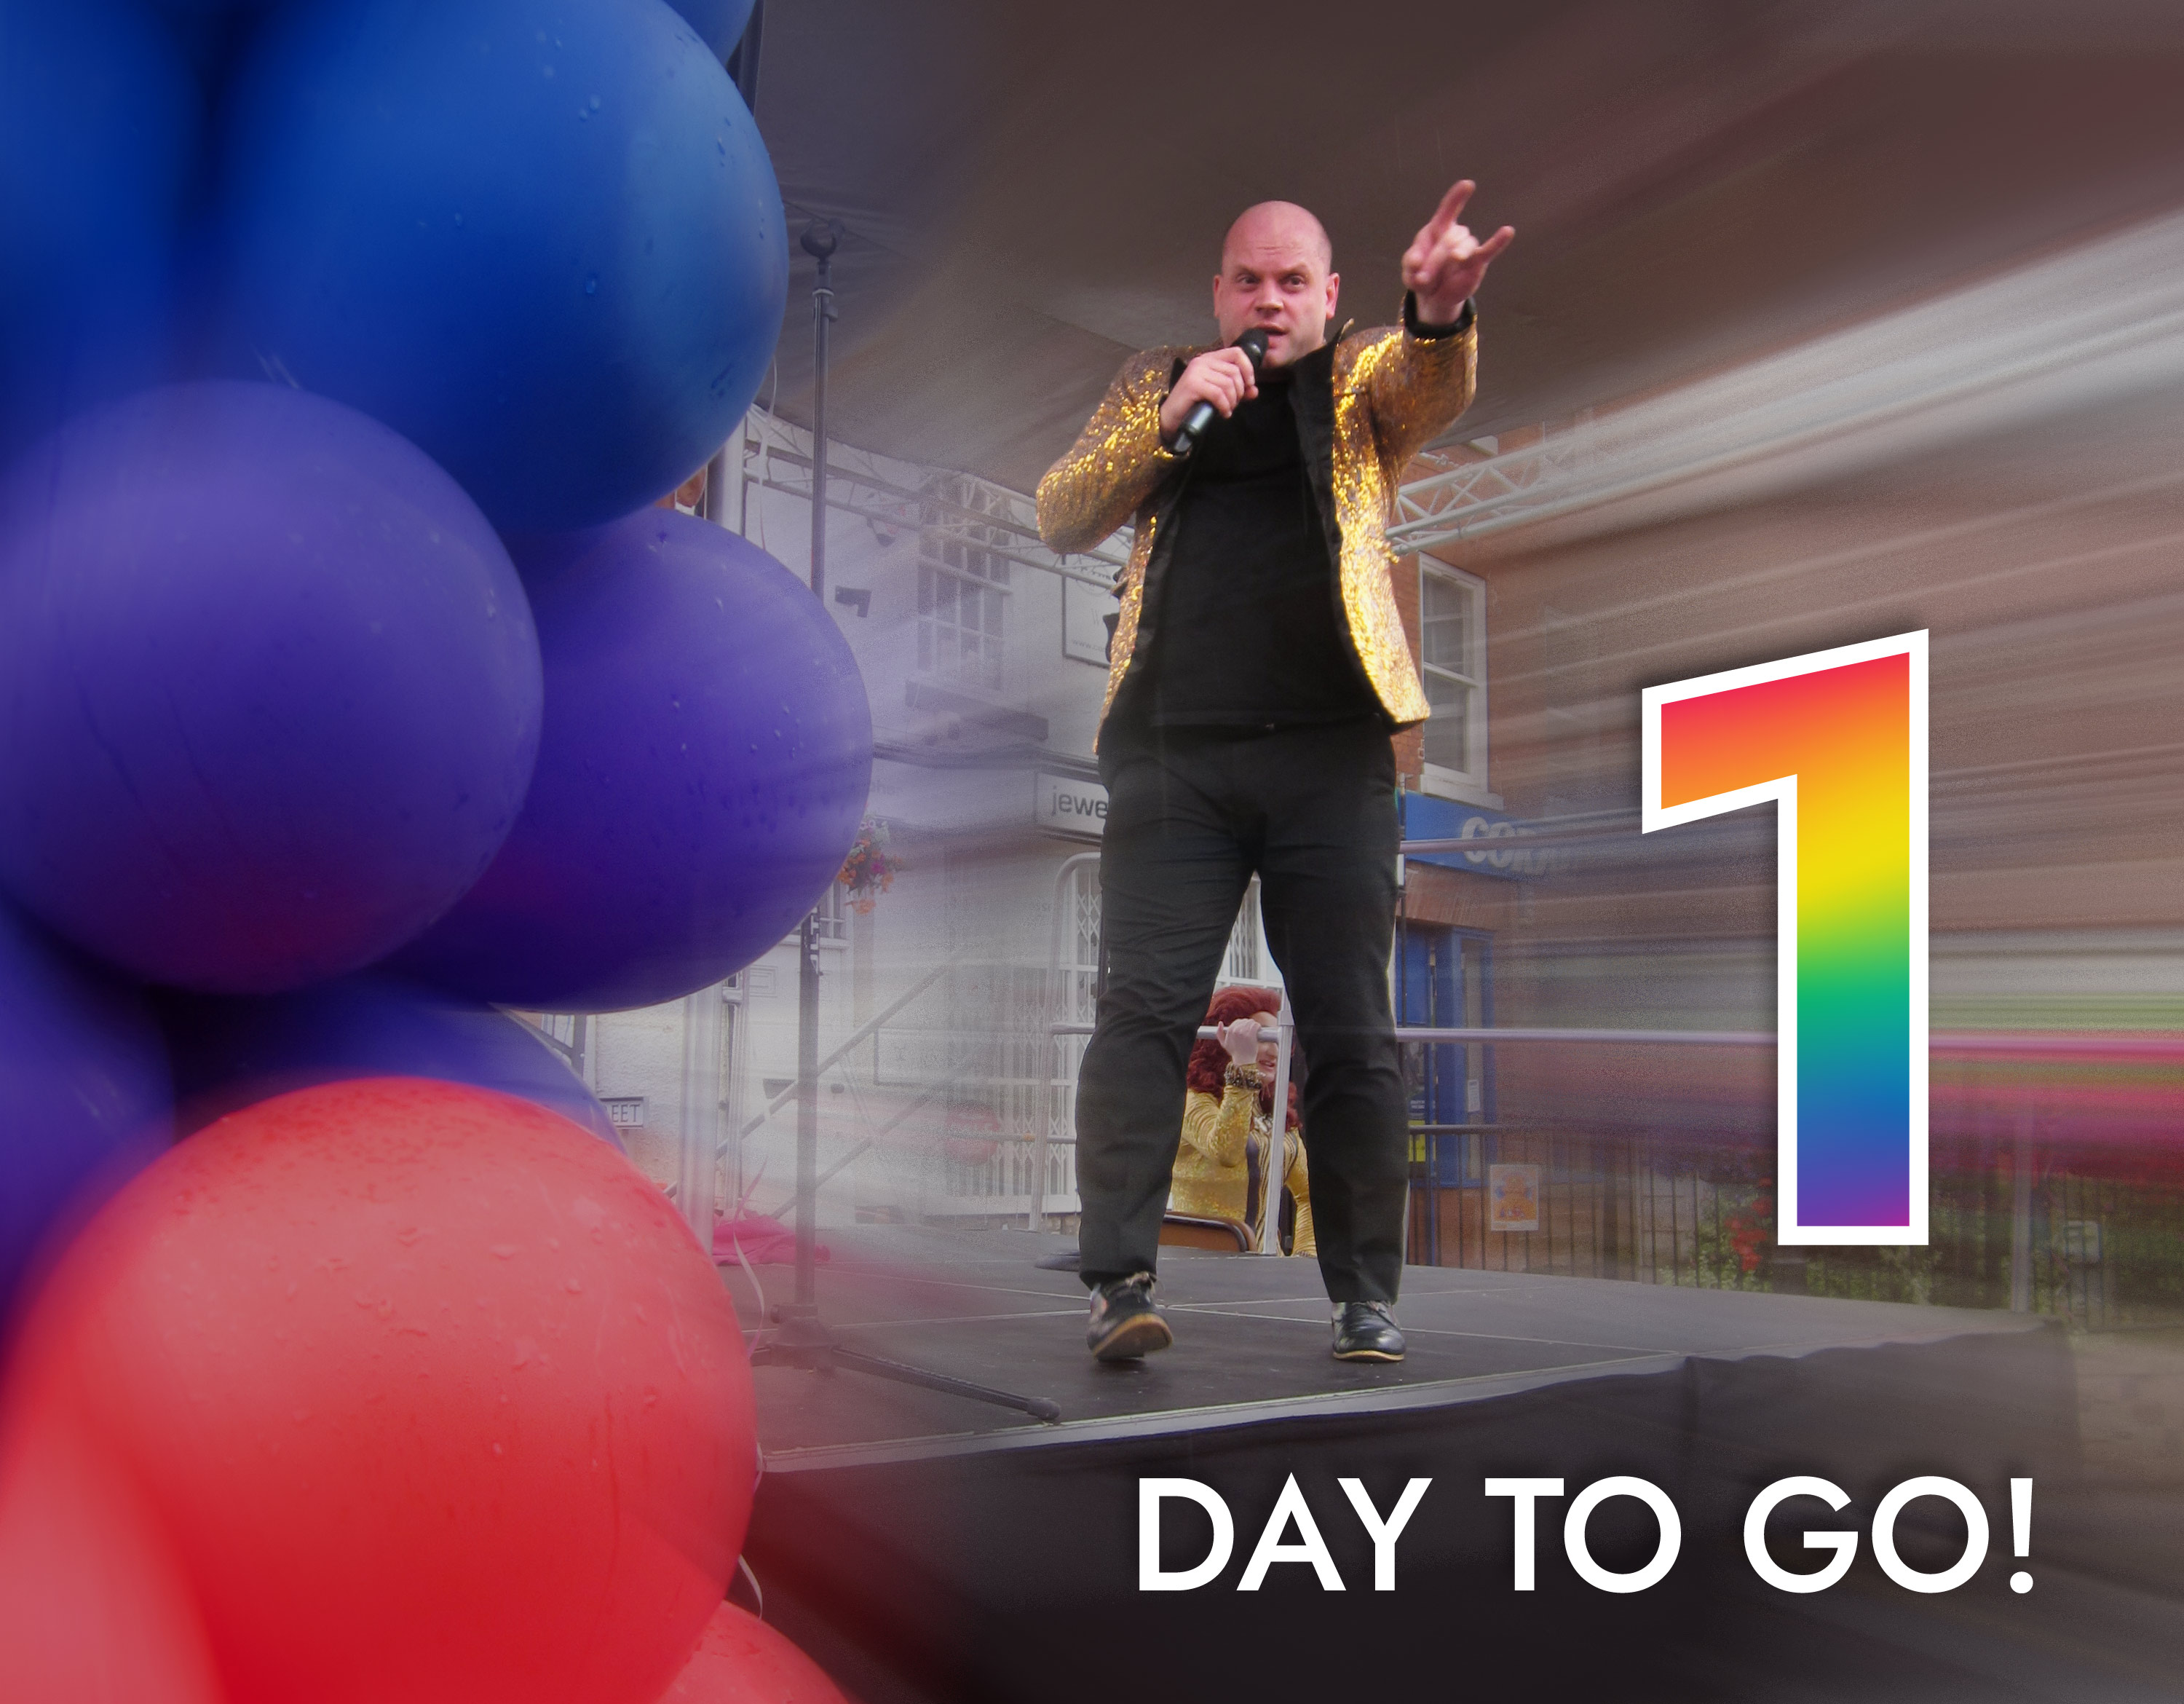 1 day to go!